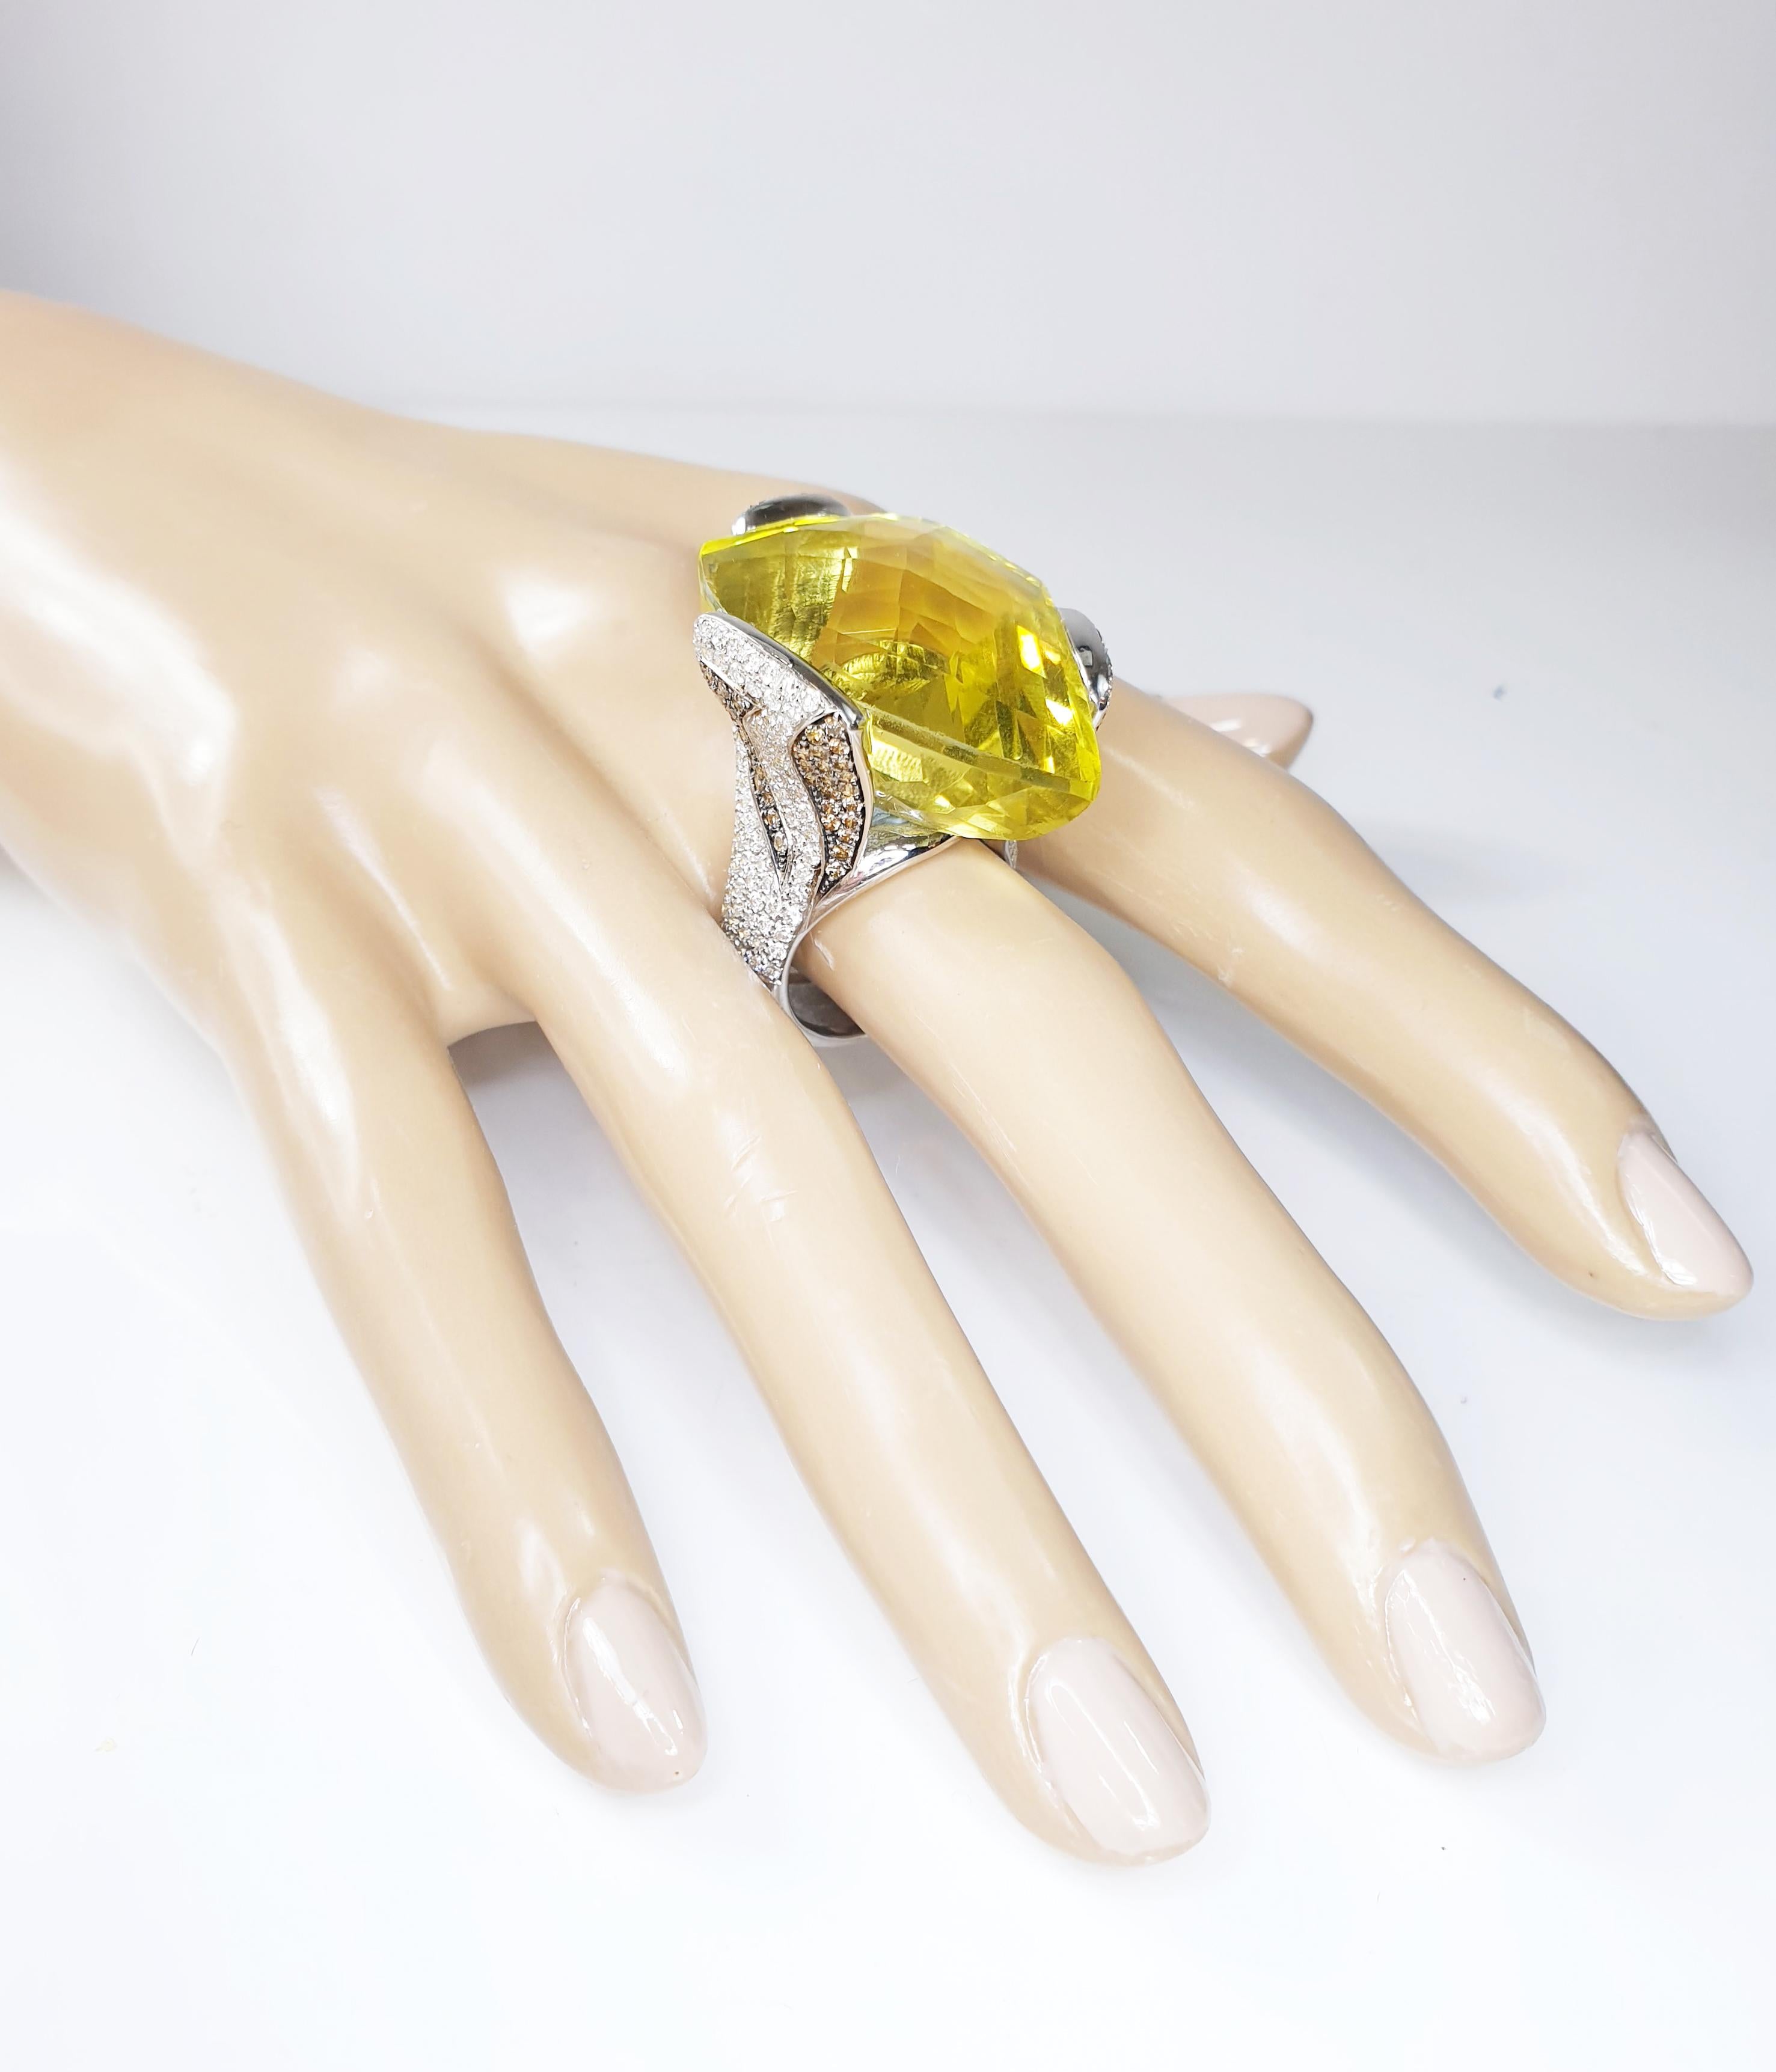 Multifaceted 51 Carat Citrine Quartz with Diamonds and 18 Karat White Gold Ring For Sale 1